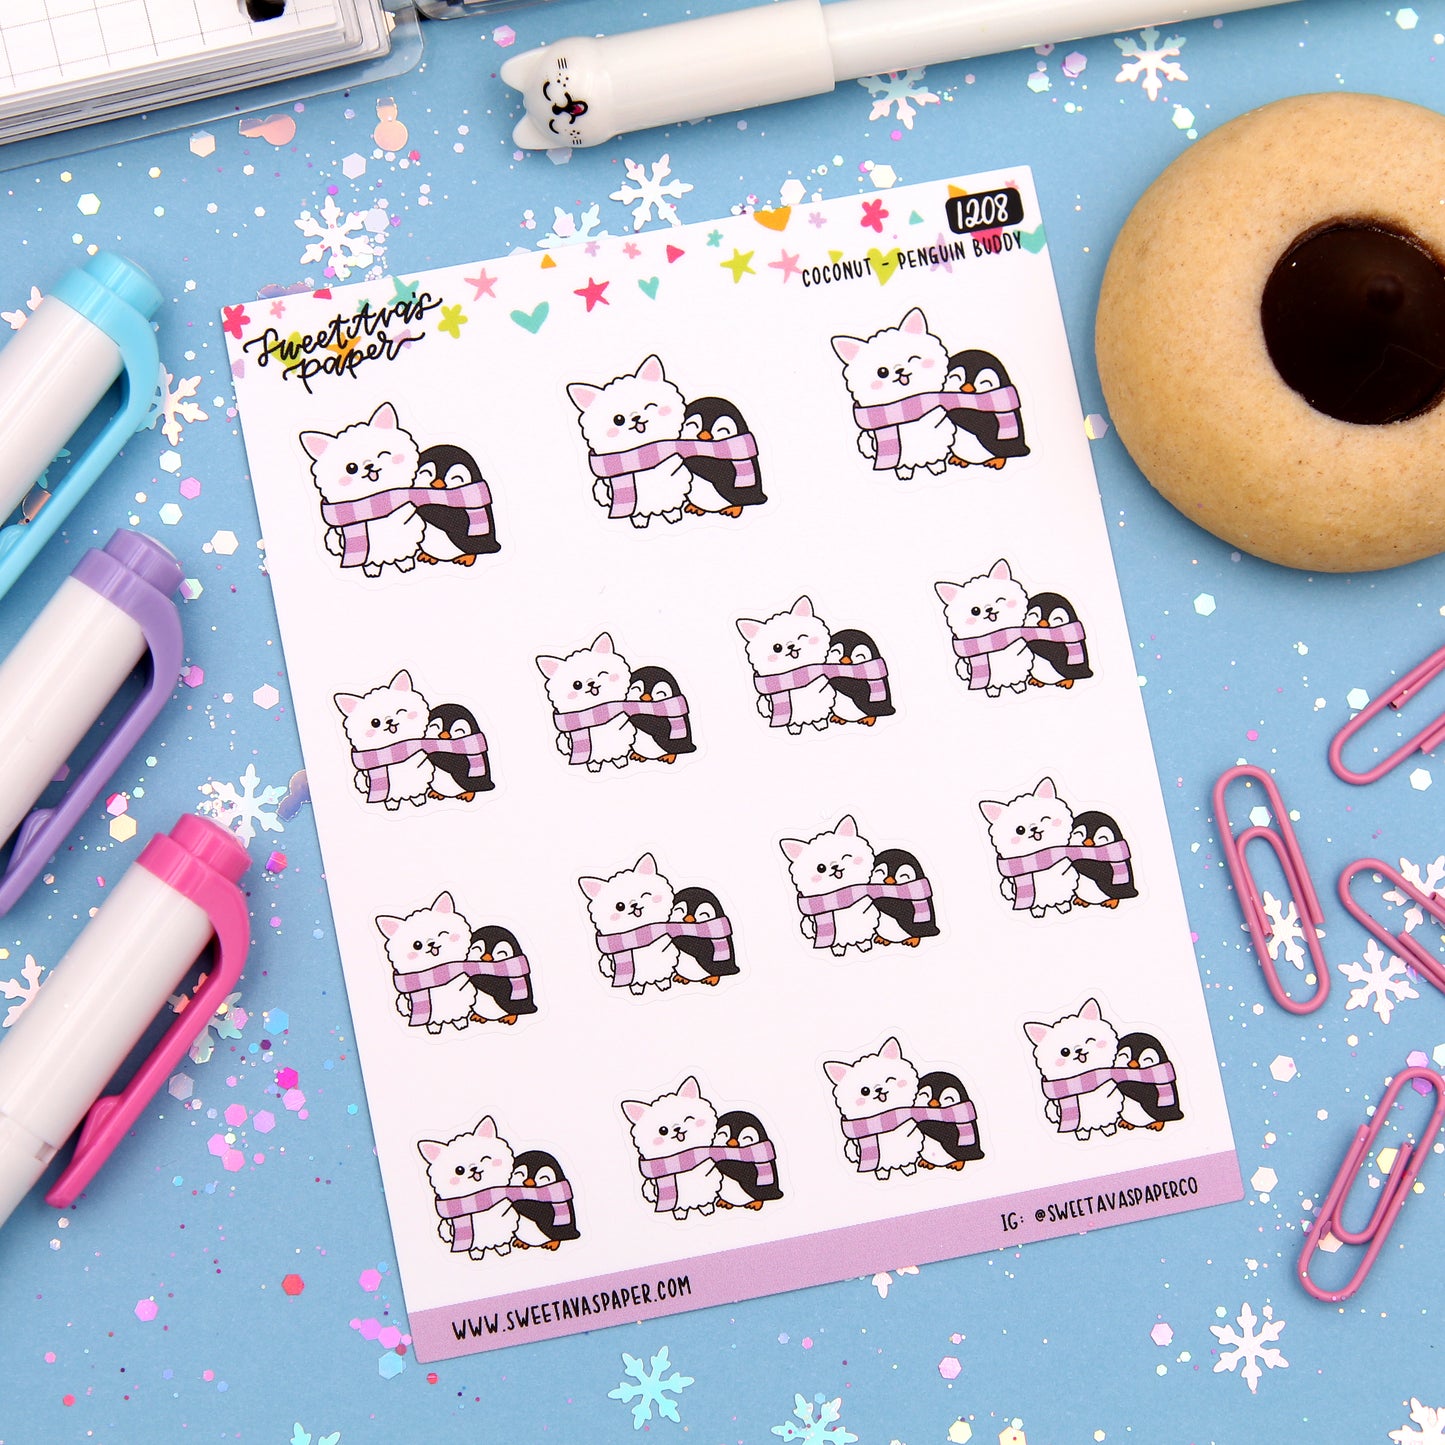 Snuggle a Penguin Planner Stickers - Coconut the Puppy [1208]